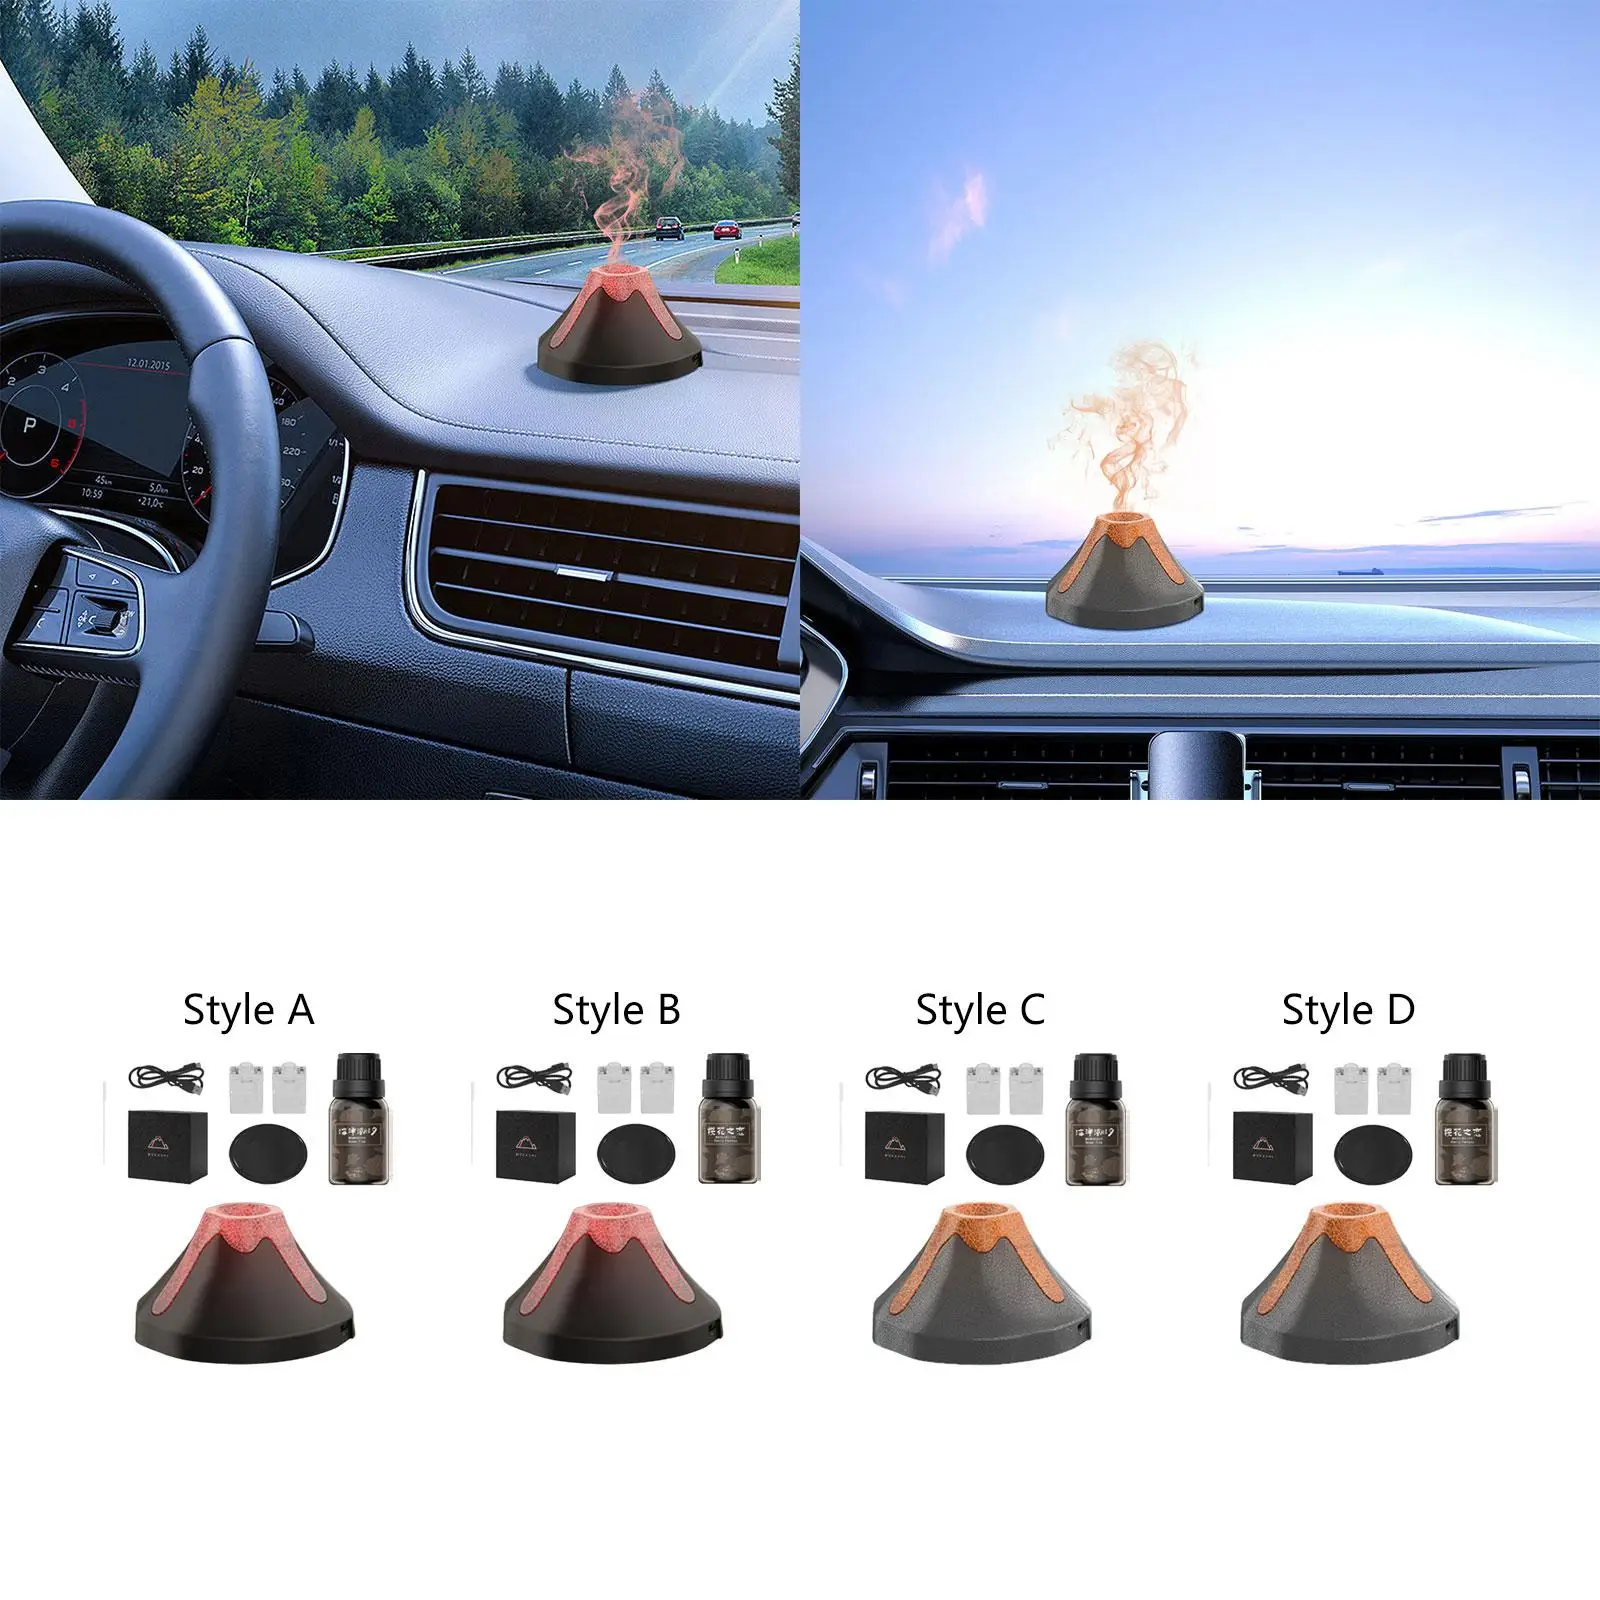 Volcano Fragrance Diffusers Humidifier for Decoration Home Room Yoga